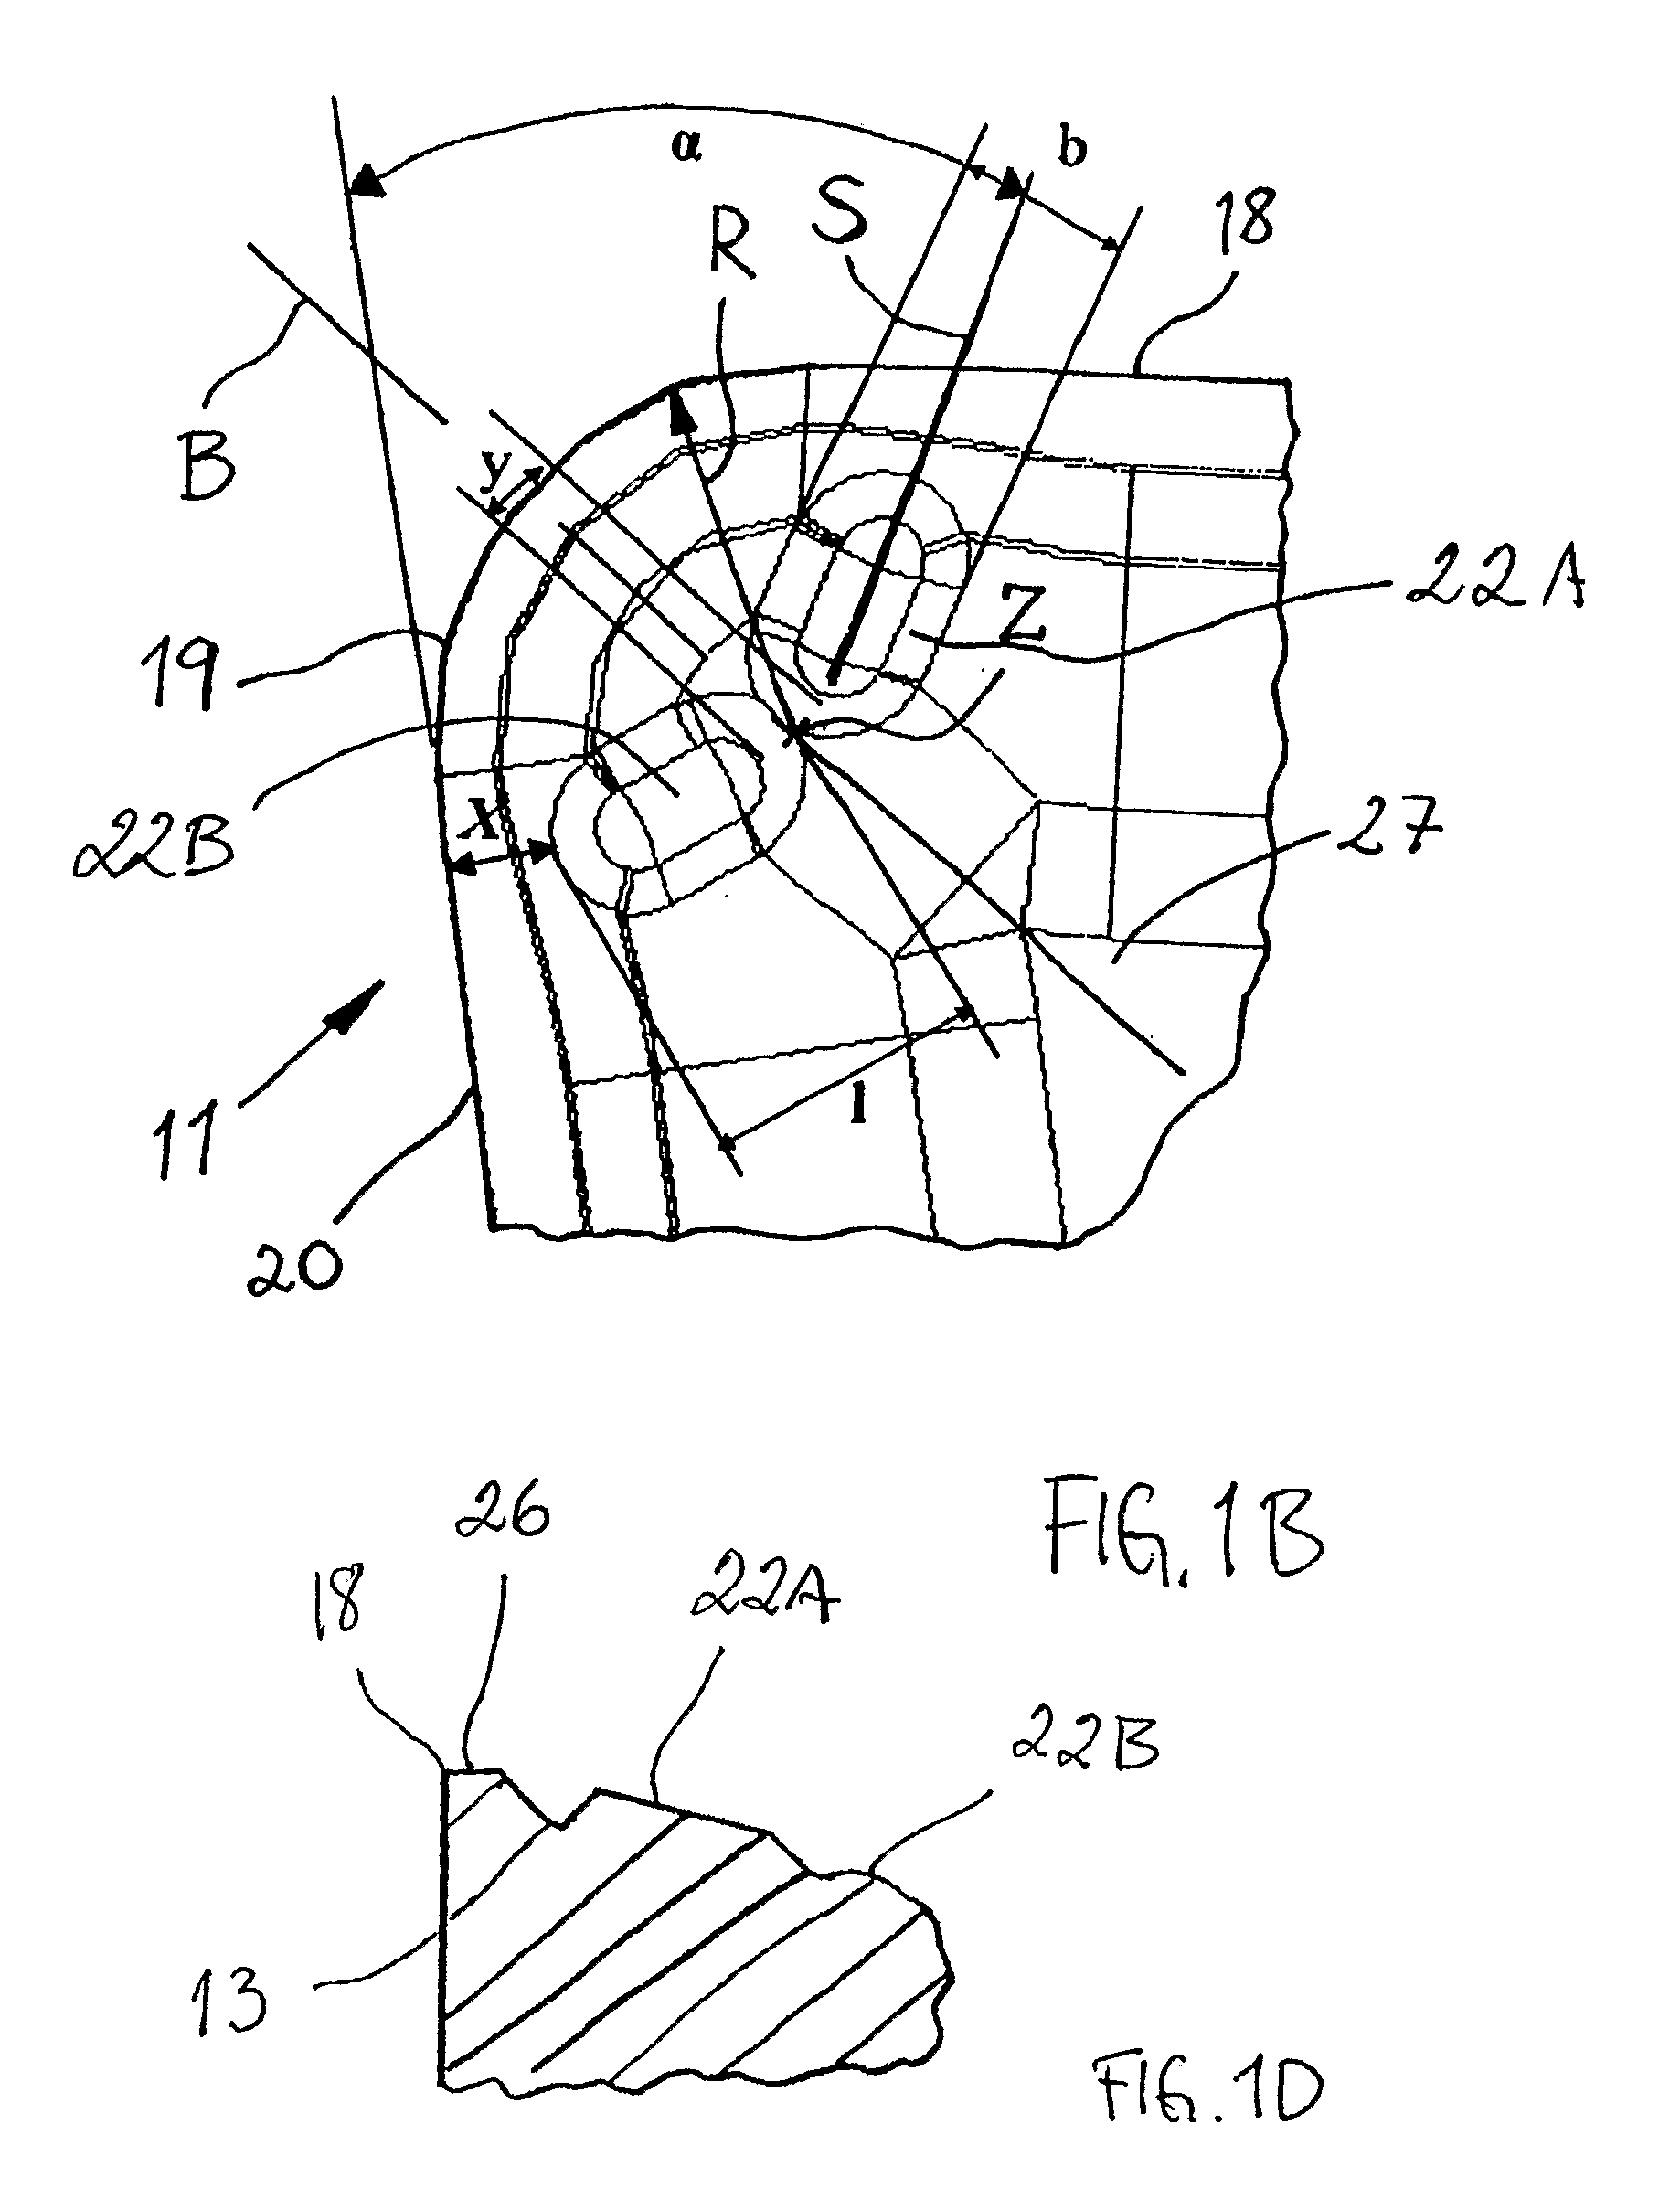 Cutting Insert for Turning with Chip-Breaker Arrangement Providing Room for a Cooling Jet